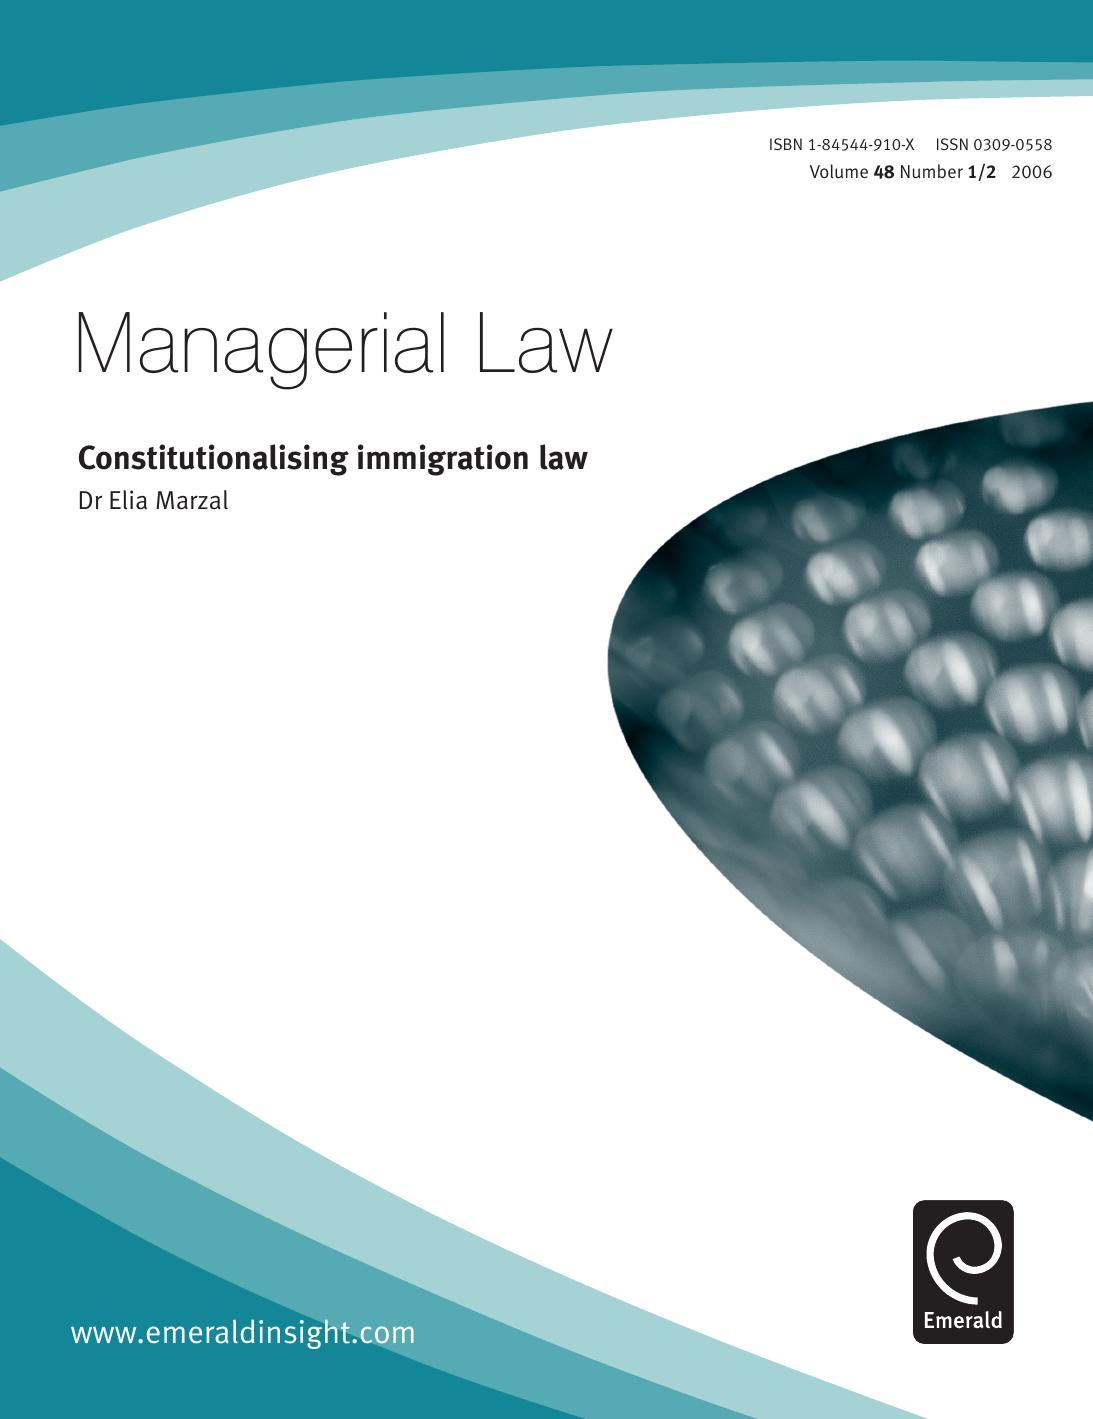 Constitutionalising immigration law by Elia Marzal